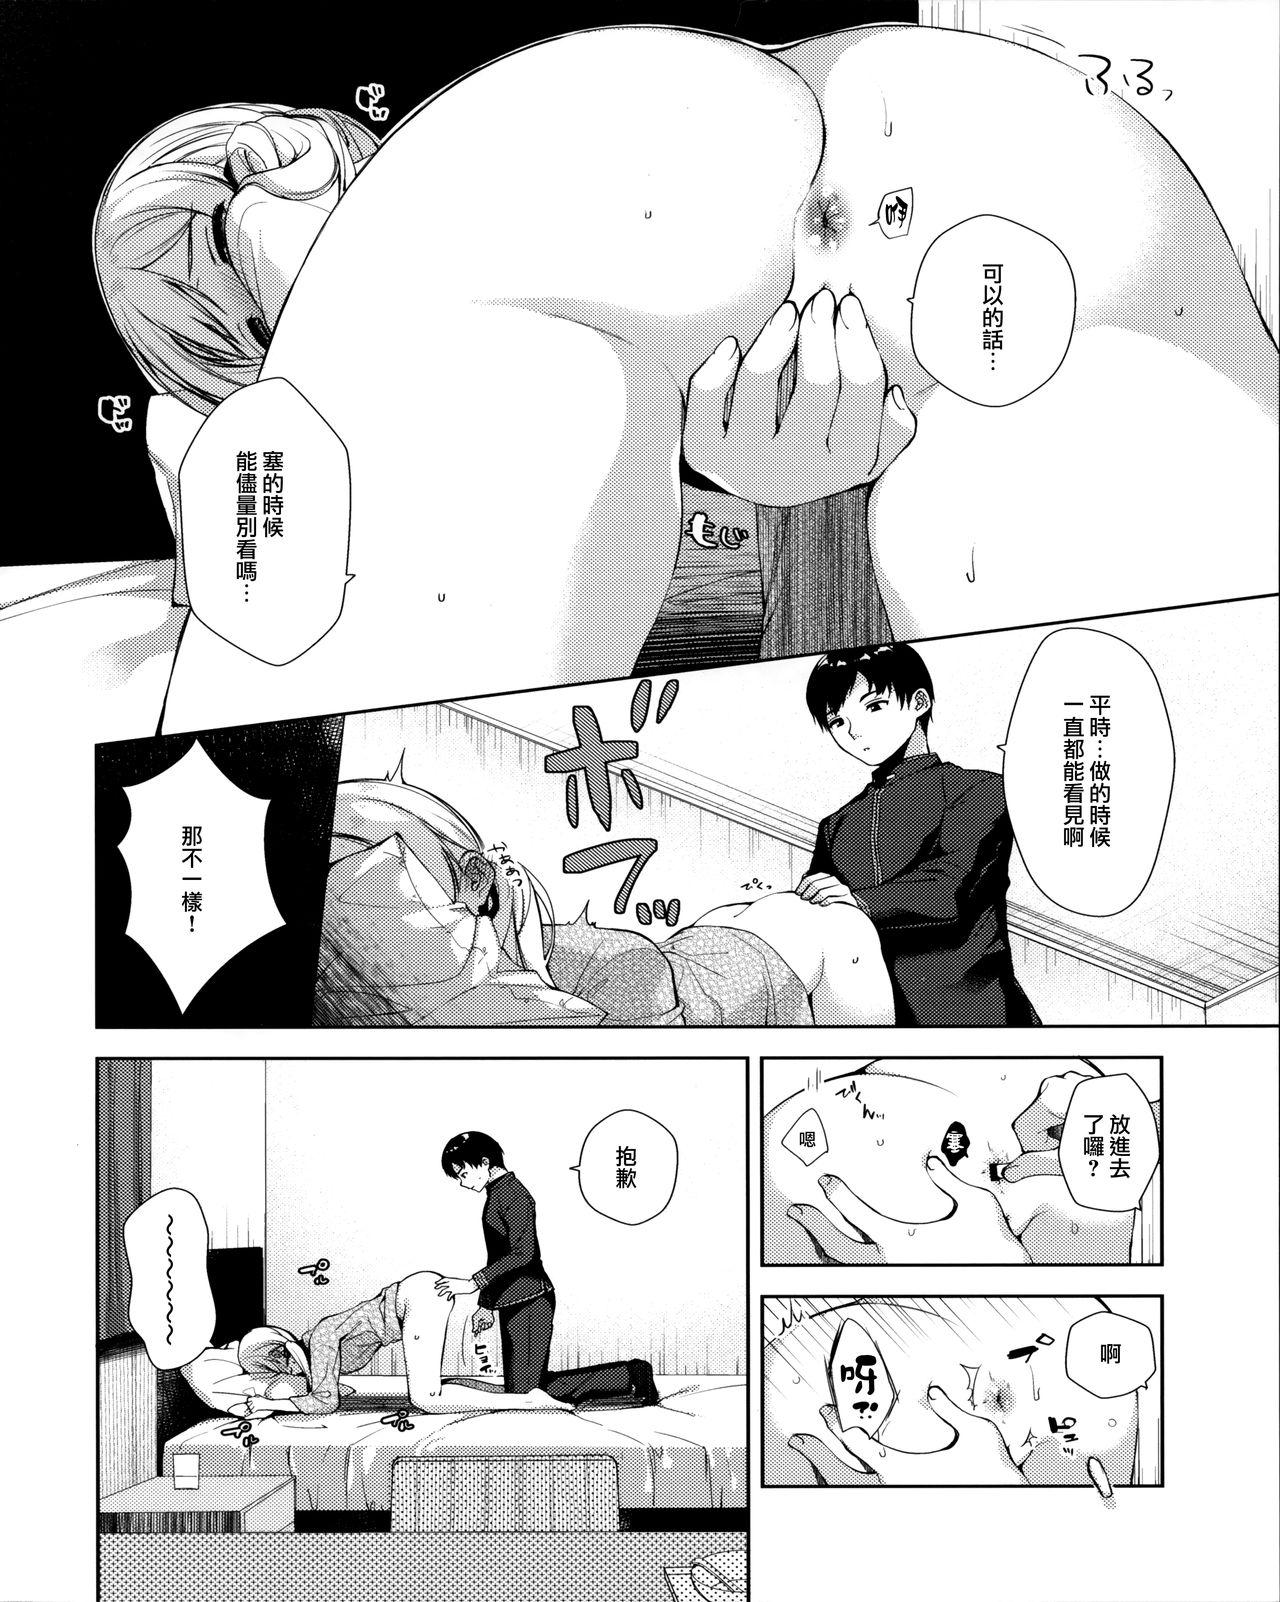 Missionary Position Porn +1°C - Kantai collection Finger - Page 7